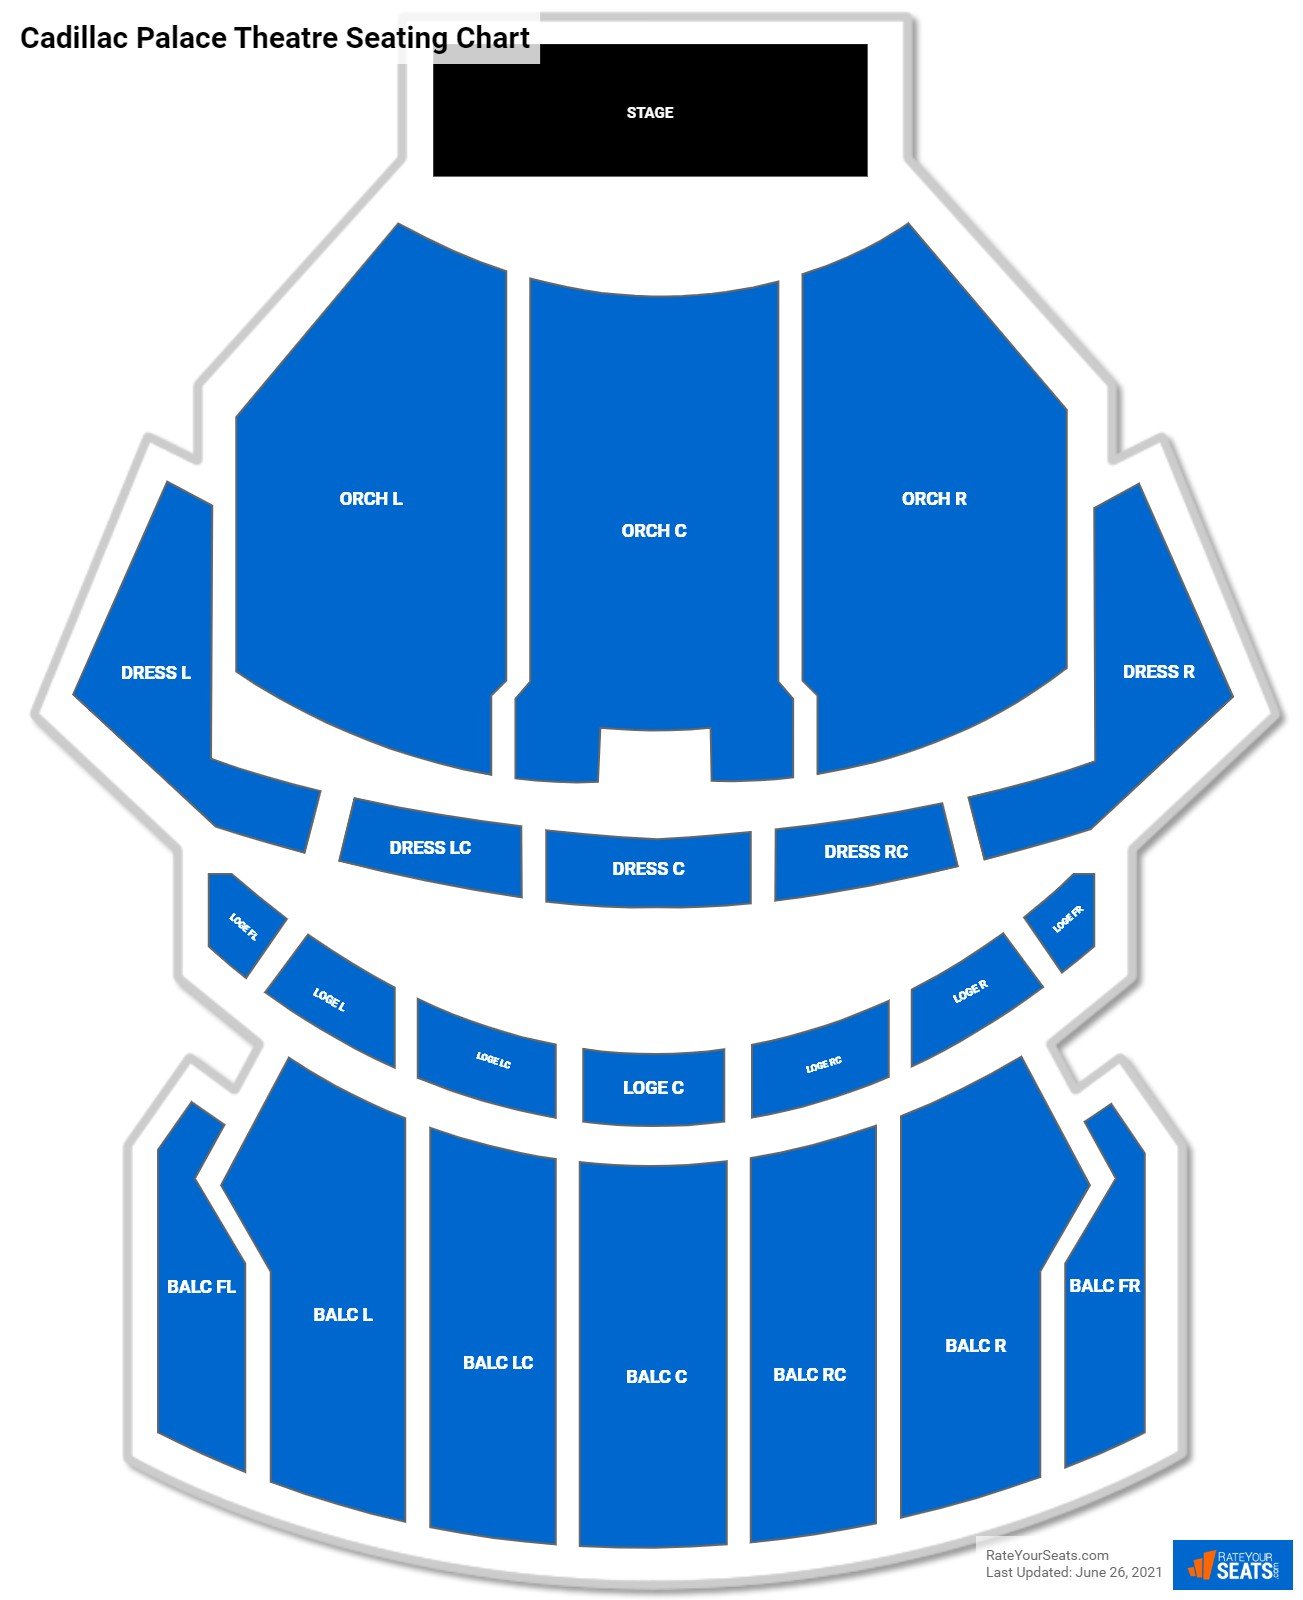 Cadillac Palace Theatre Theater Seating Chart